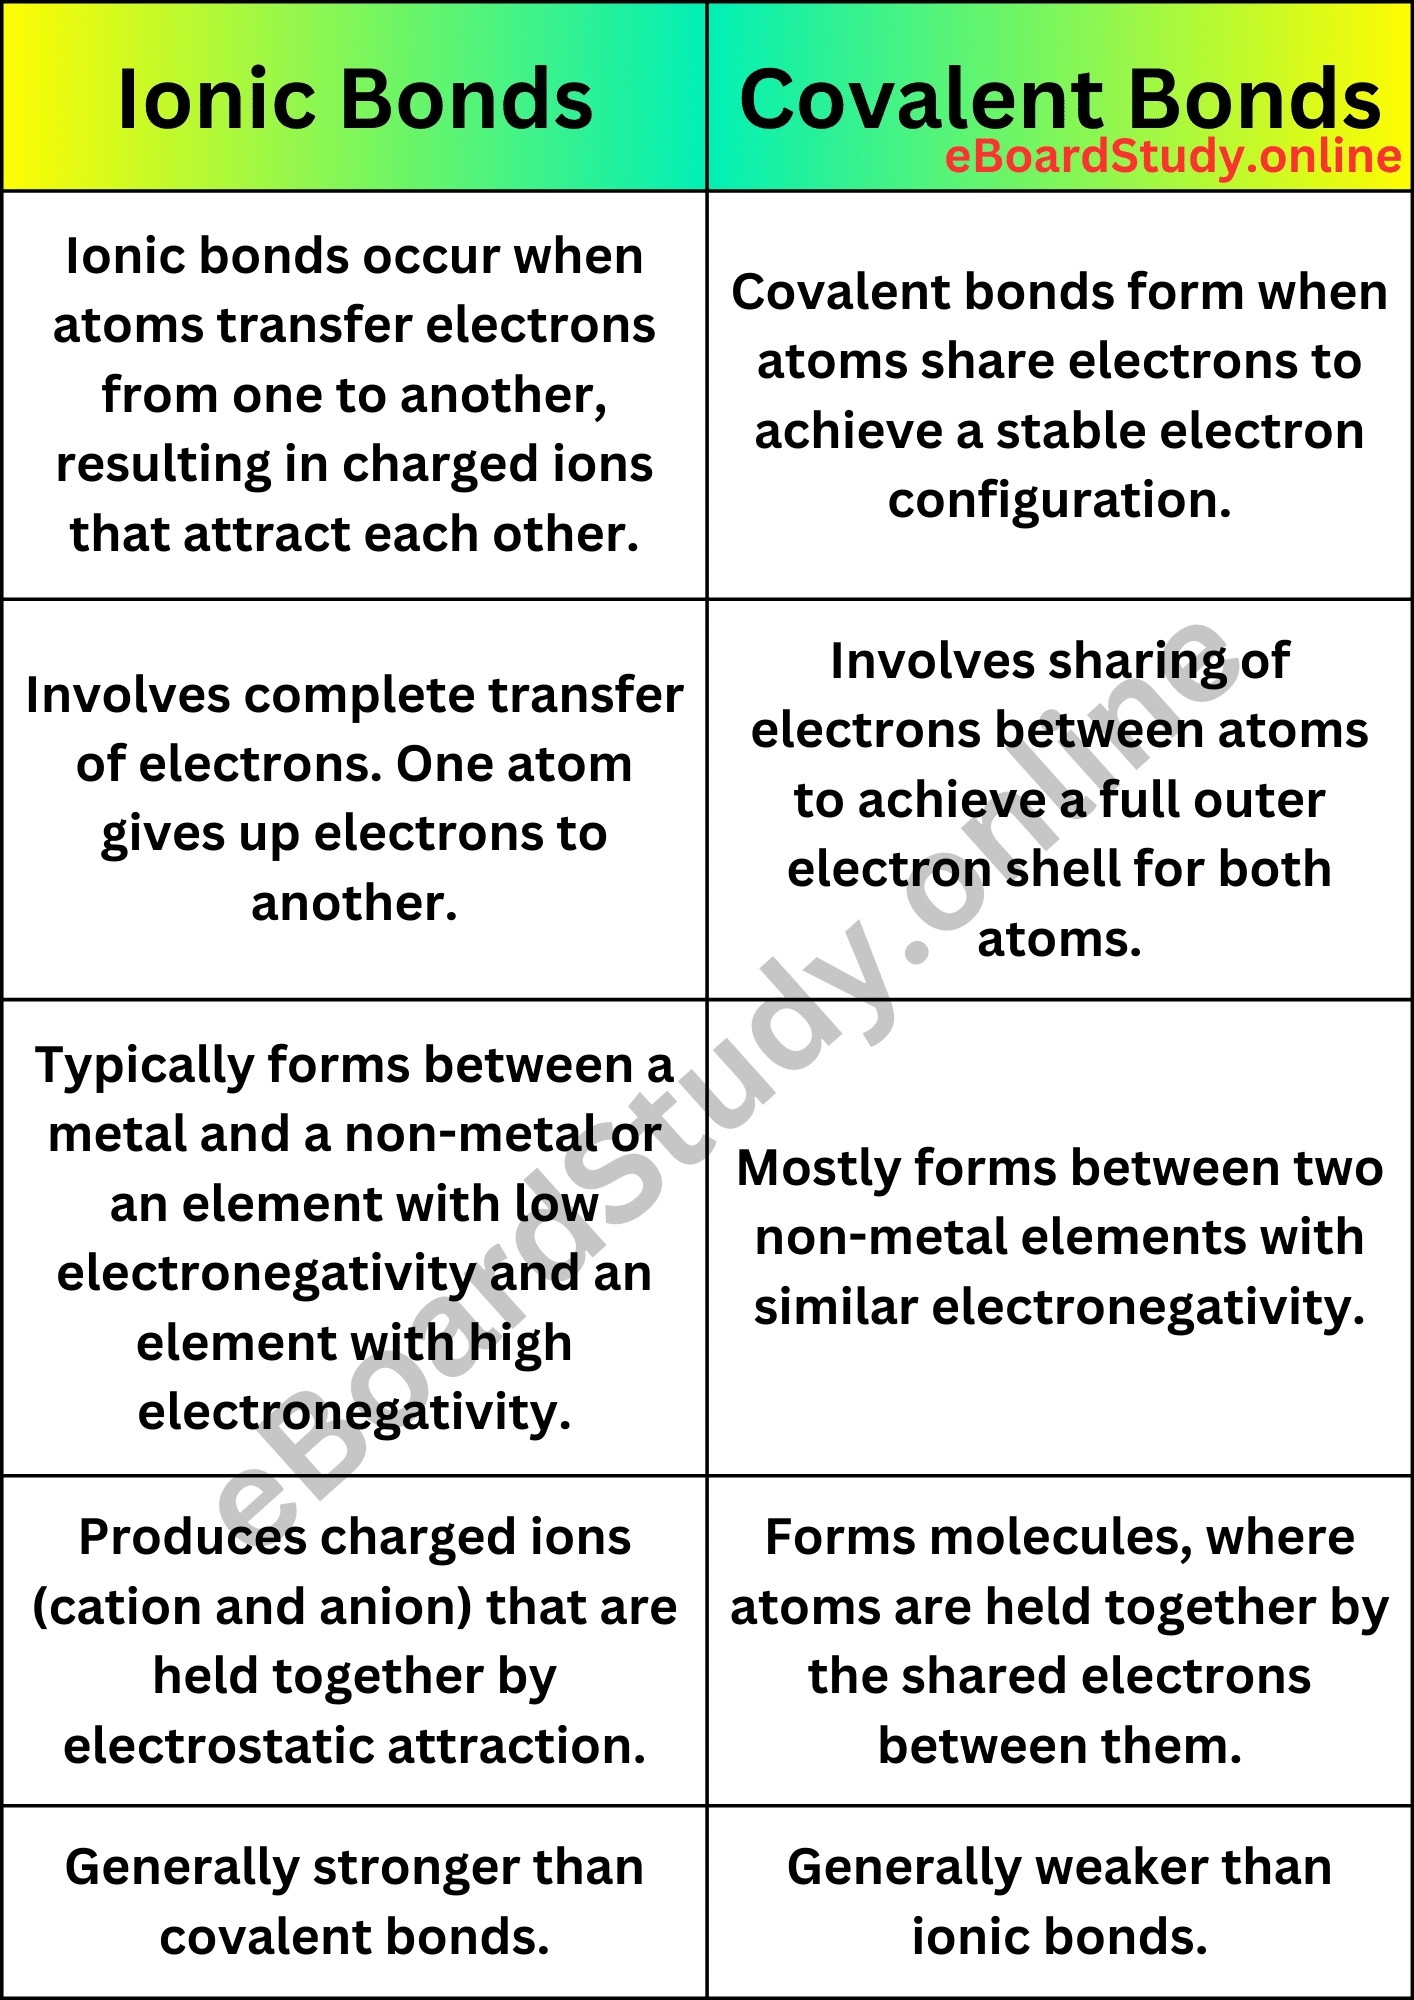 Difference between Ionic and Covalent Bonds comparison table